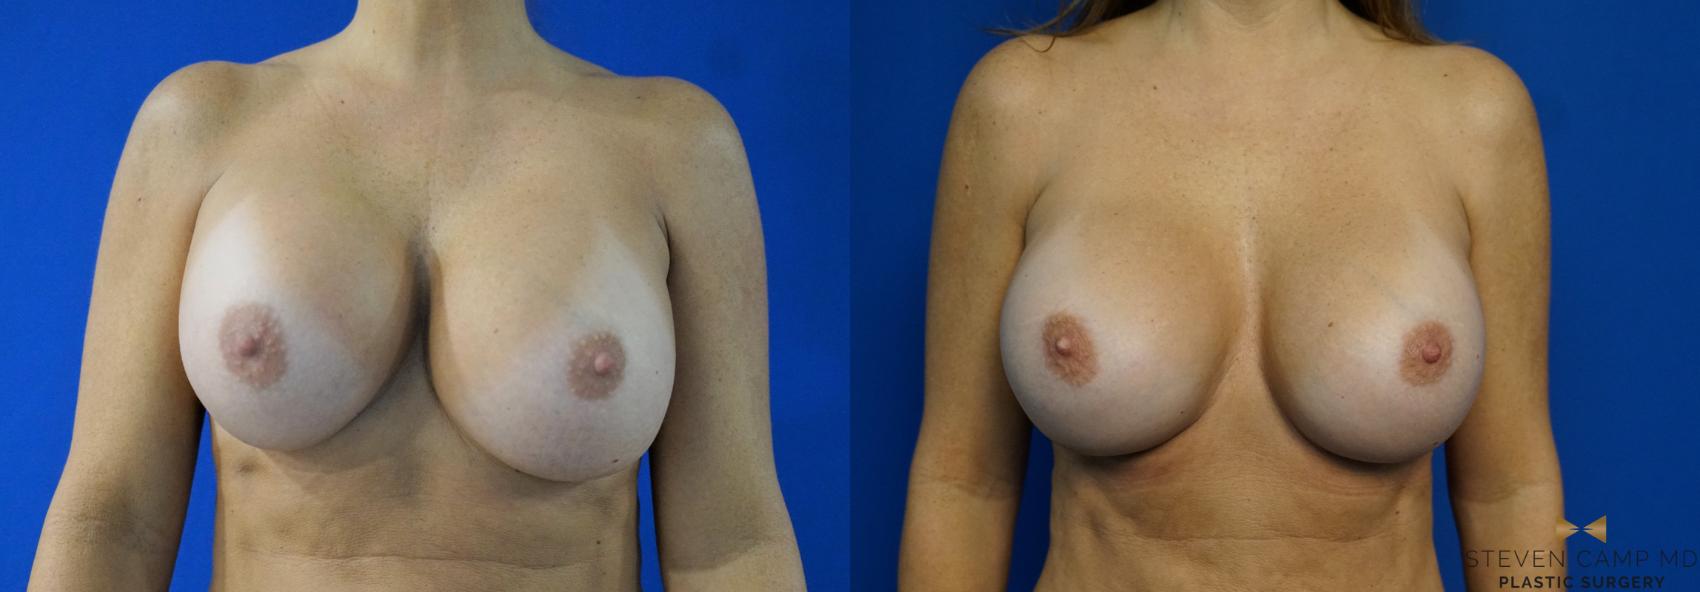 Breast Implant Exchange  Before & After Photo | Fort Worth, Texas | Steven Camp MD Plastic Surgery